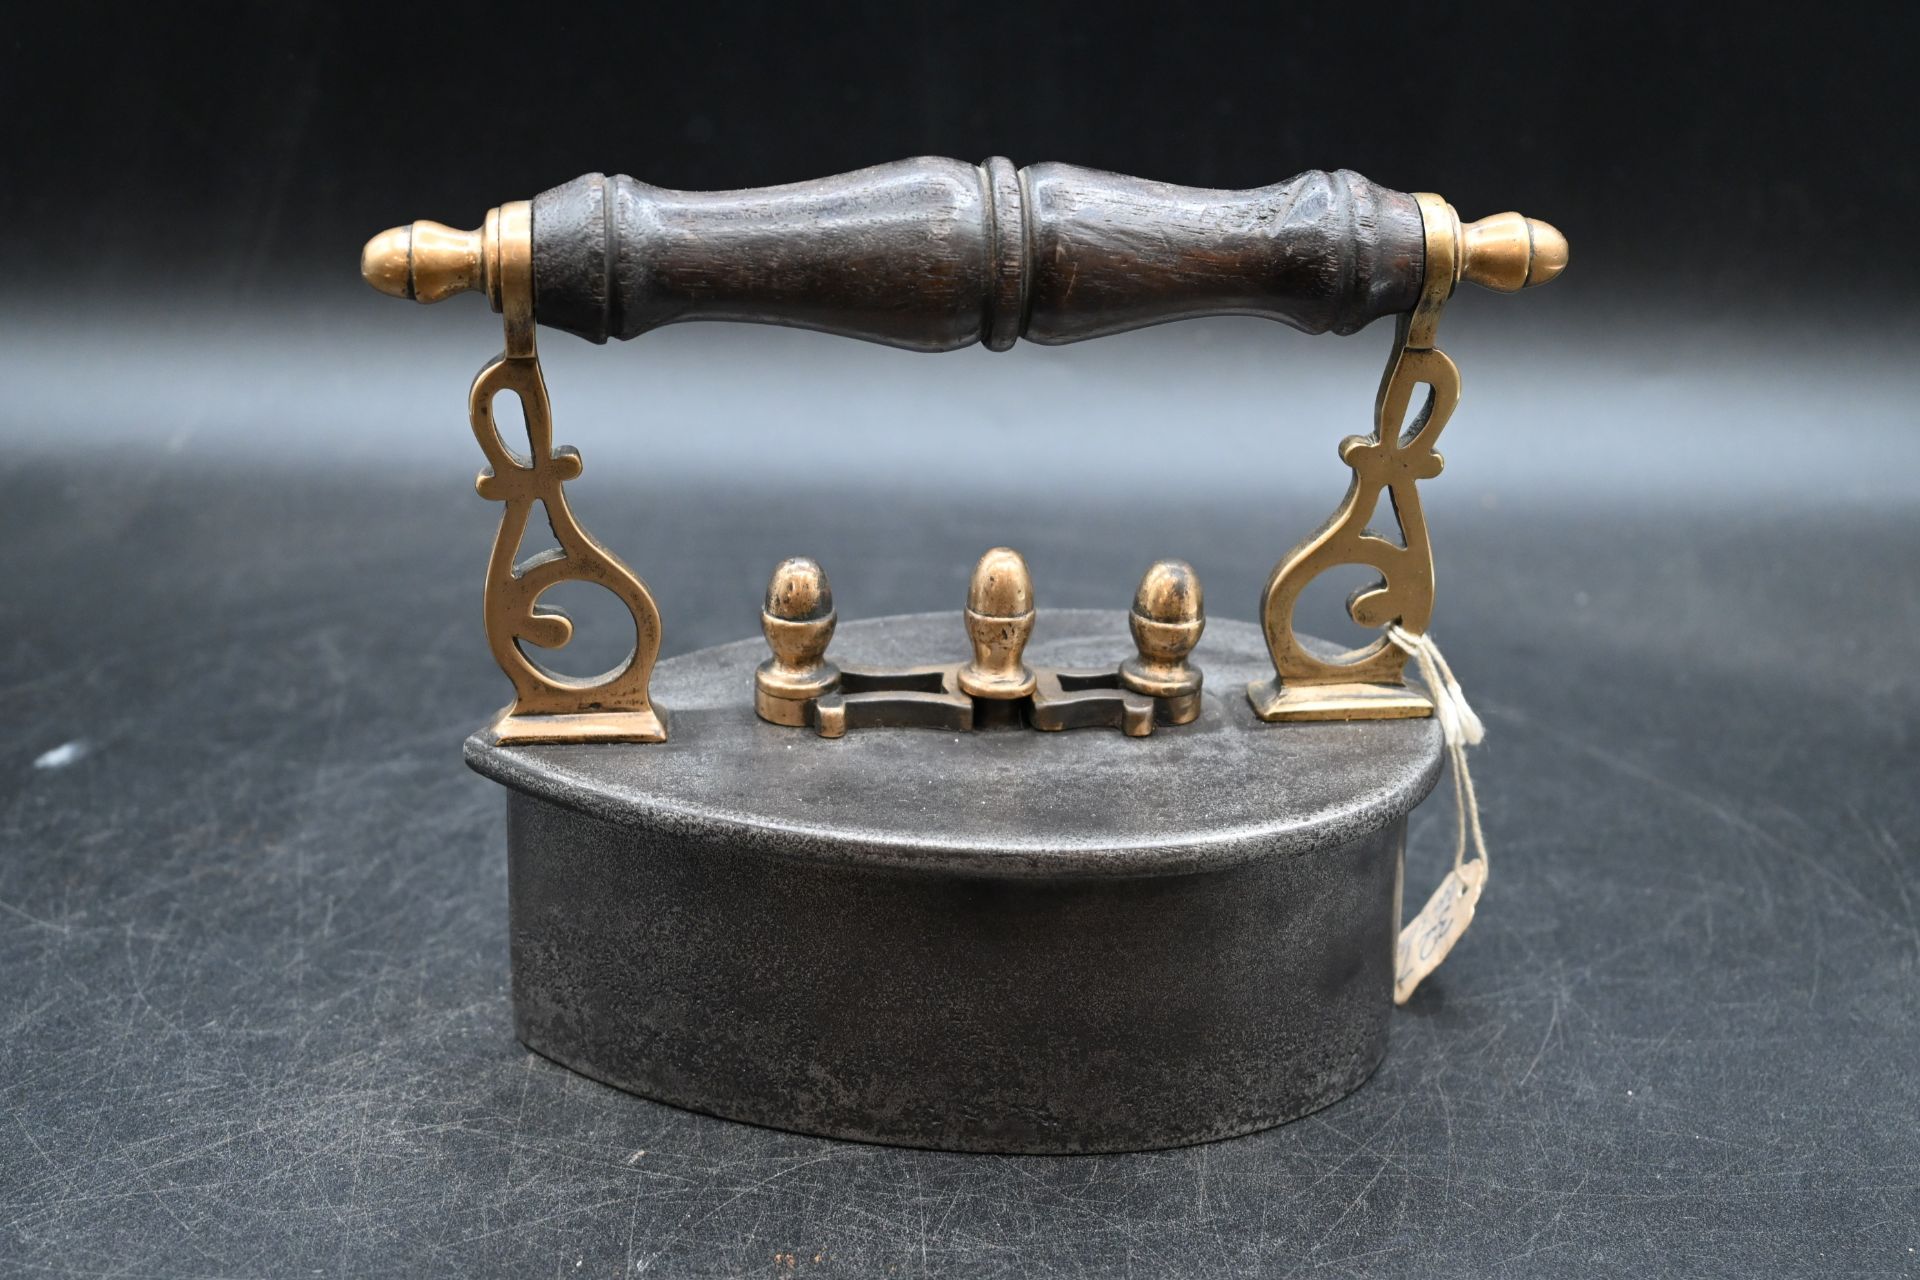 Scottish teardrop shaped box iron with brass castings and brass scroll posts with wood turned handle